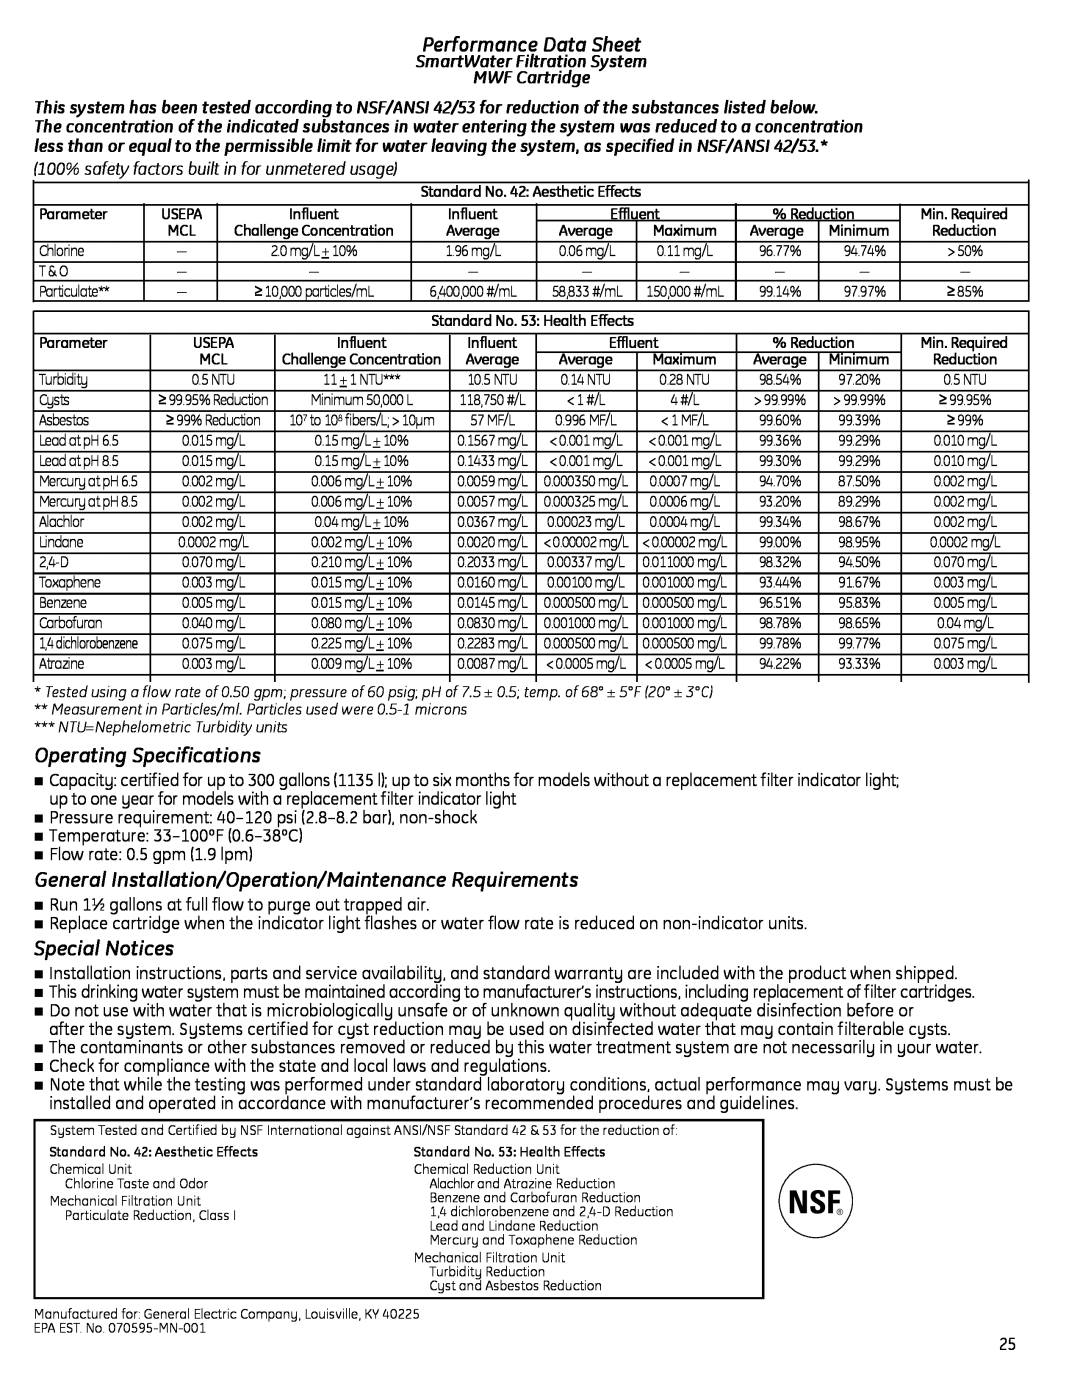 GE Monogram 225D1804P011 owner manual Performance Data Sheet, operating Specifications, Special Notices 